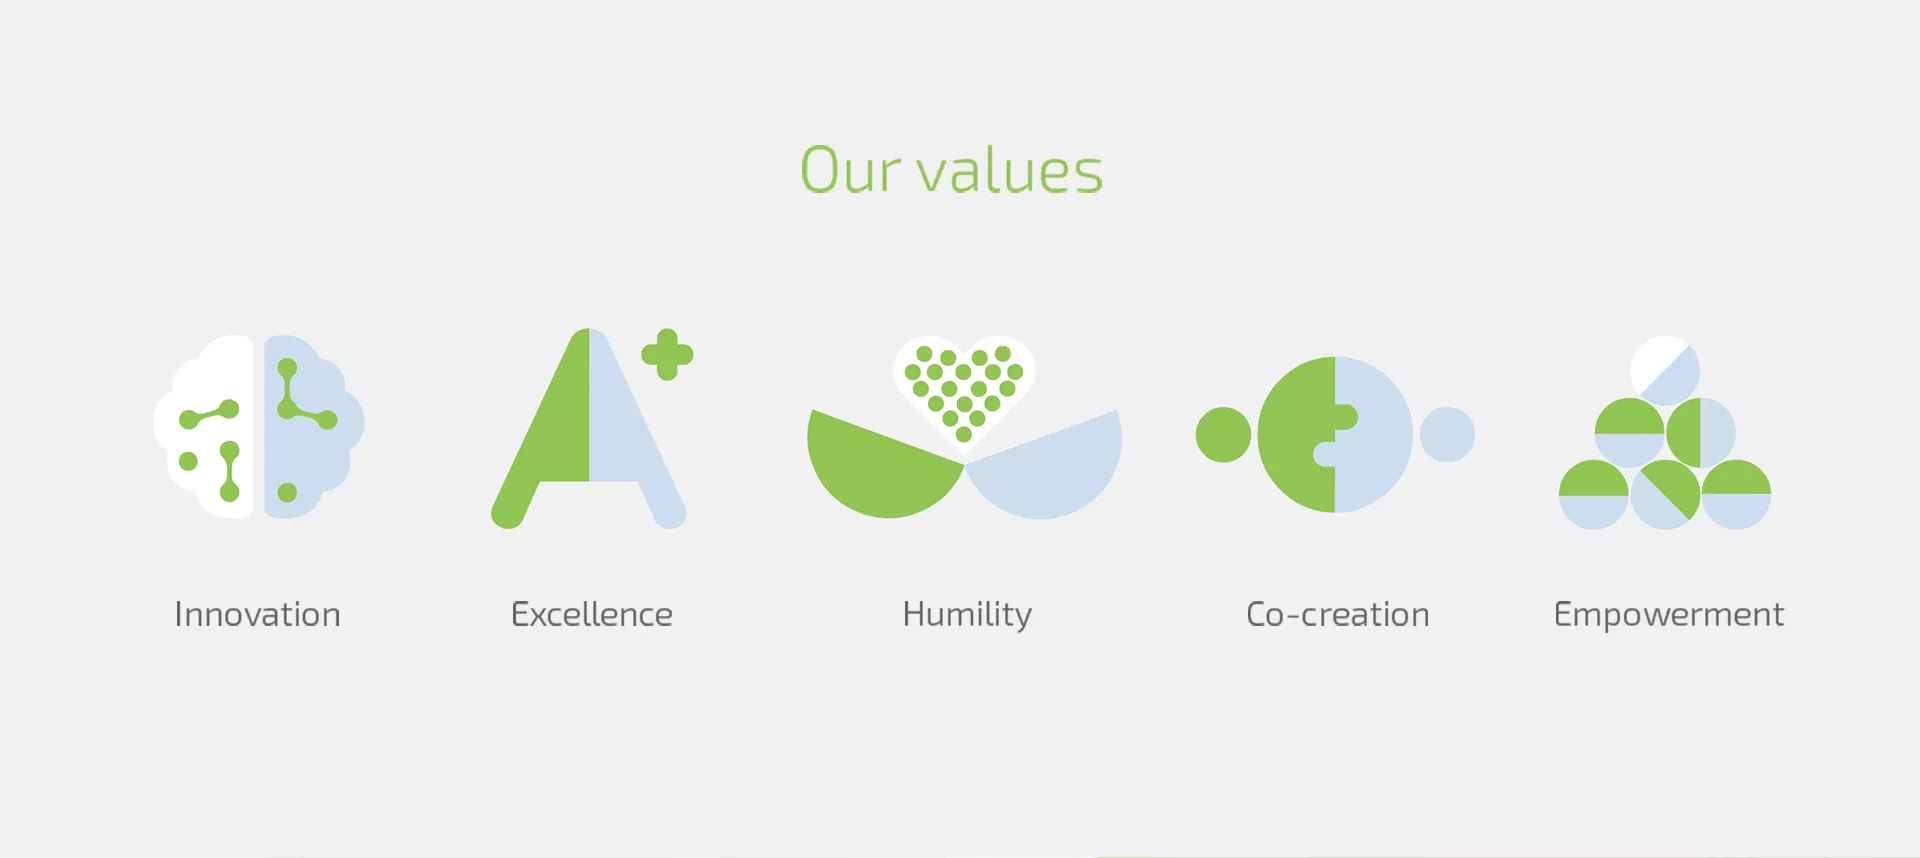 argenx - Our values